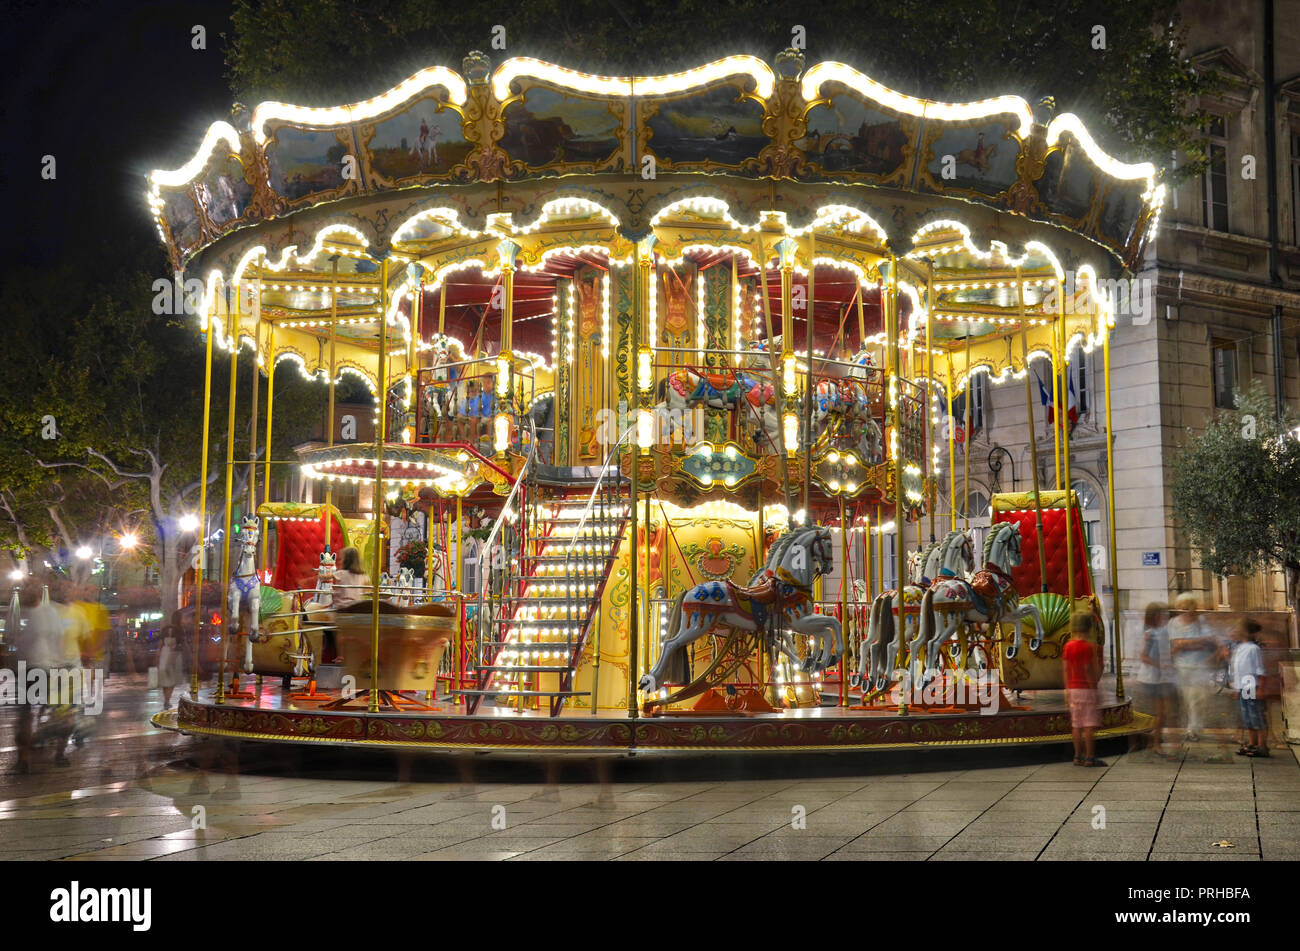 Vintage merry-go-round by night Stock Photo